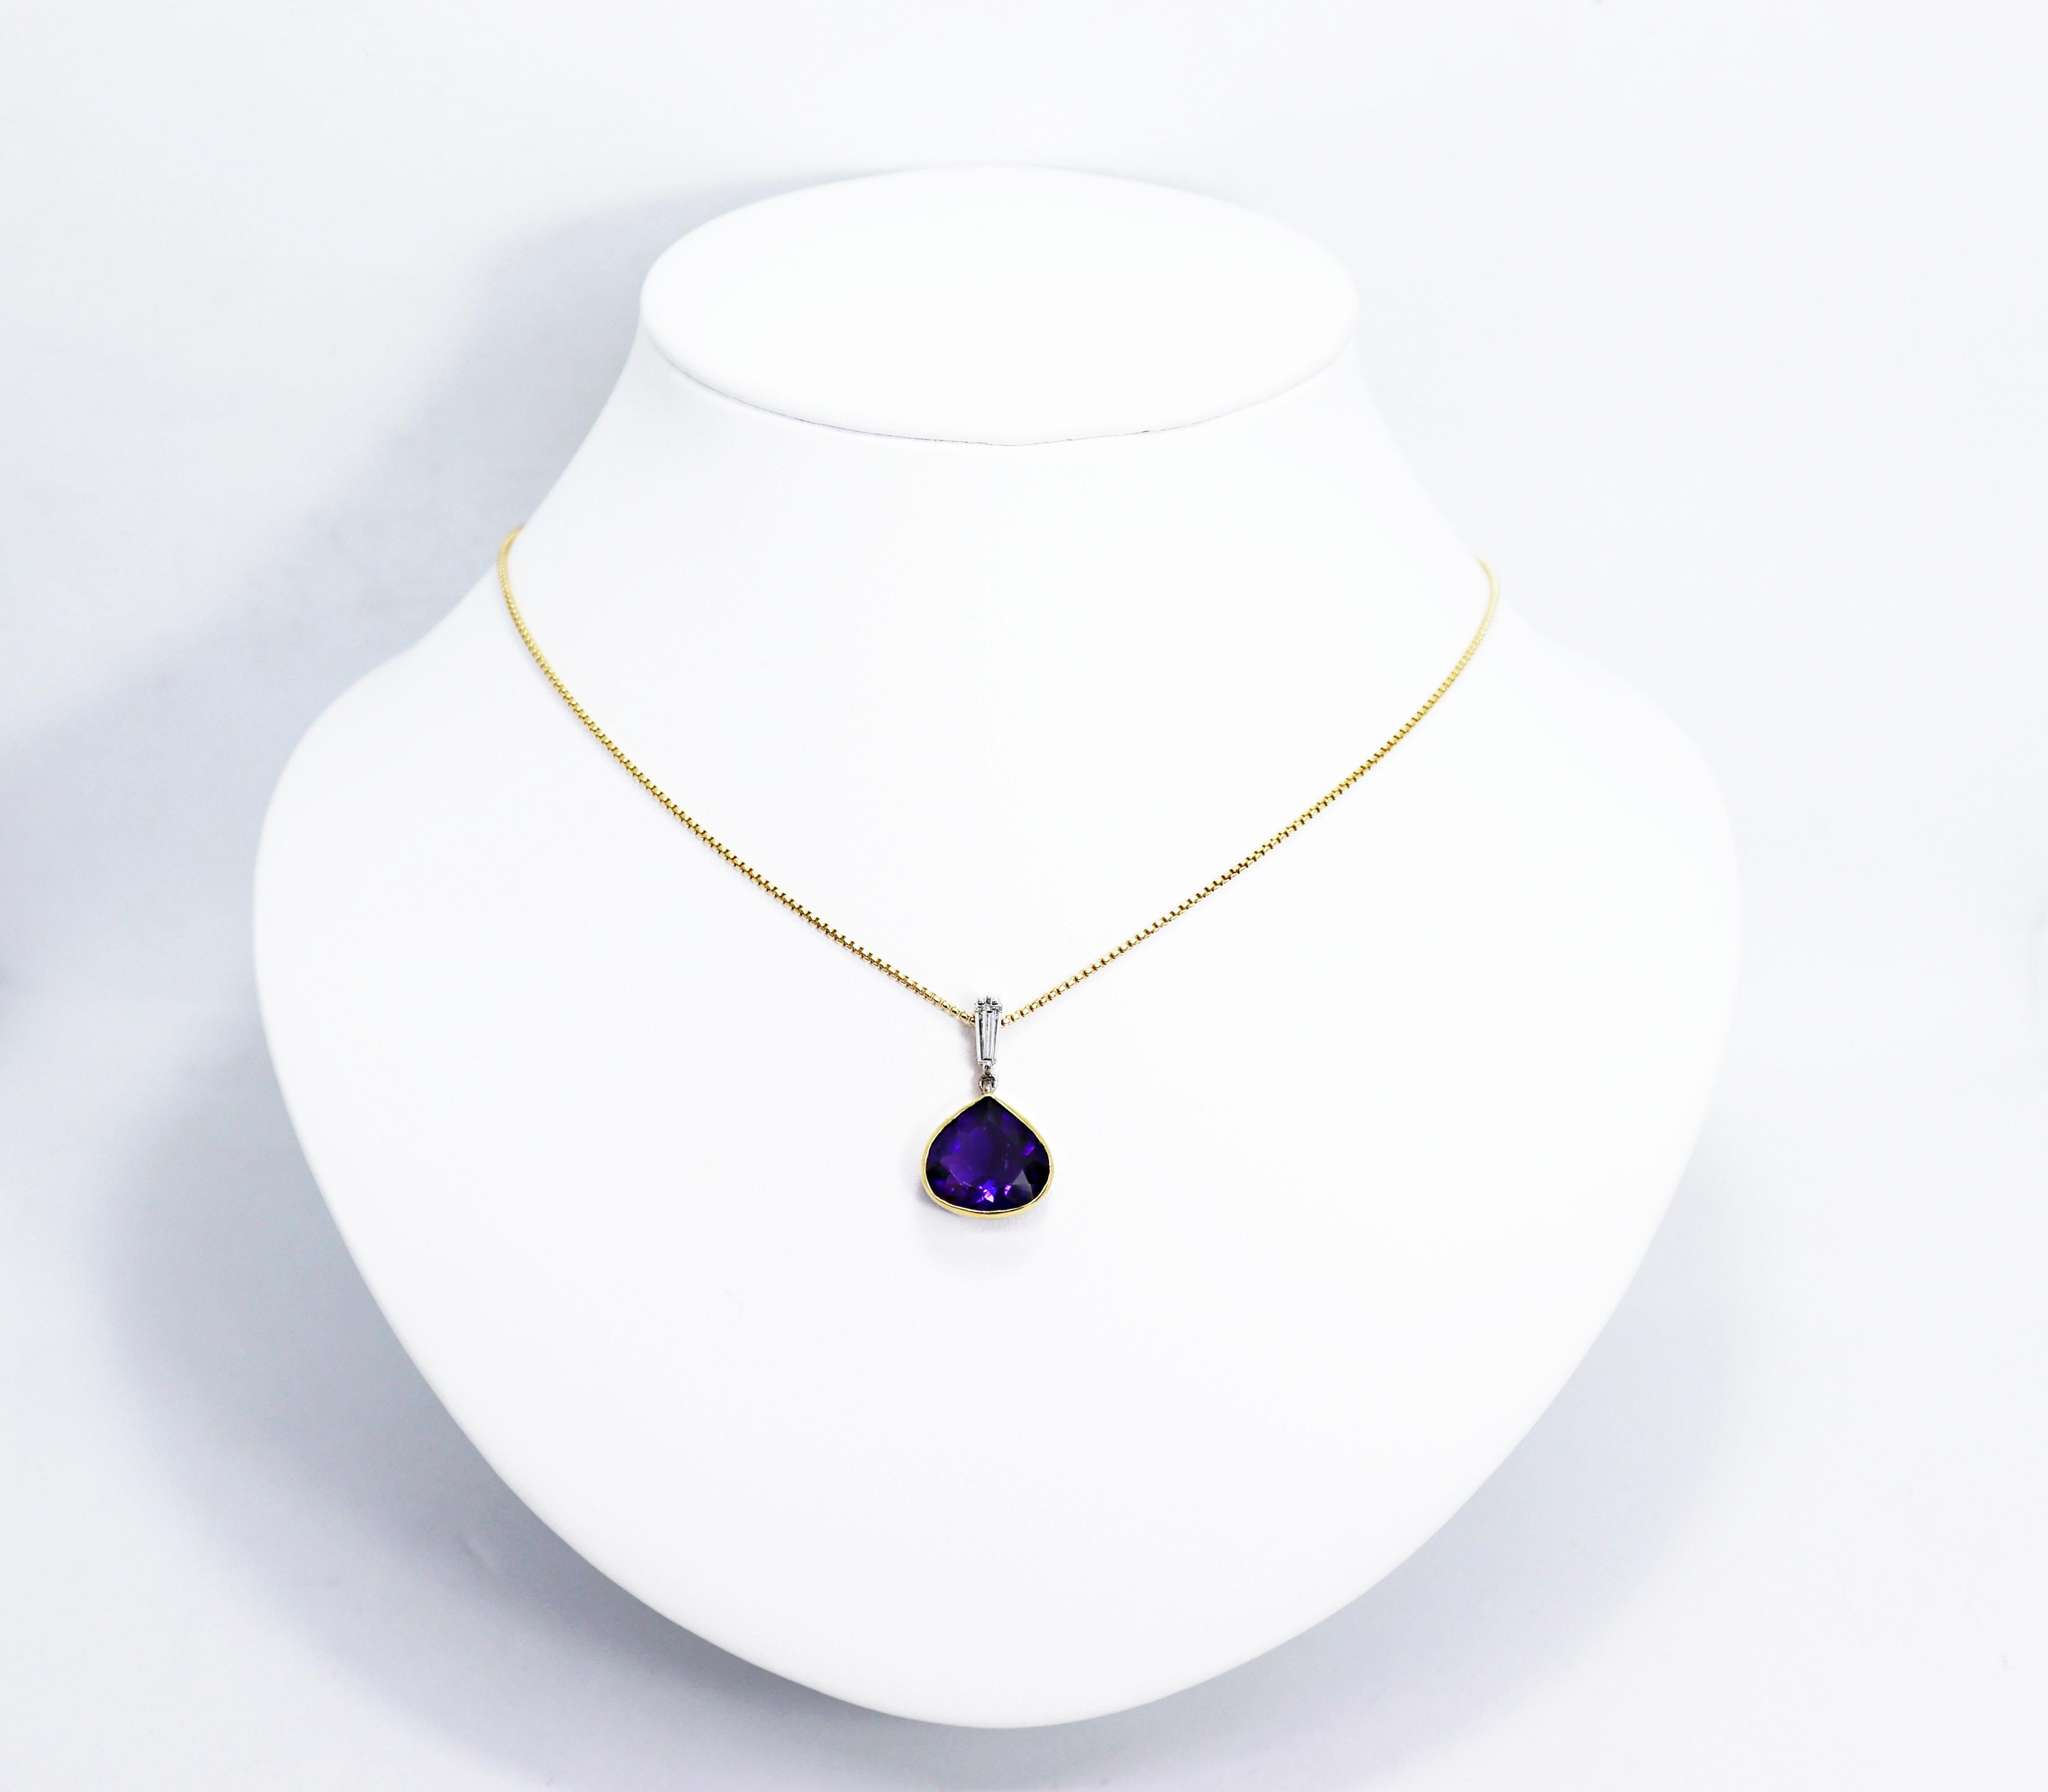 Beautiful pendant set with a fine quality fancy pear shaped amethyst weighing 5.15ct in an 18 carat yellow gold rub-over open back setting. The amethyst is linked to a tapered baguette cut diamond above it weighing 0.29ct in an 18 carat white gold